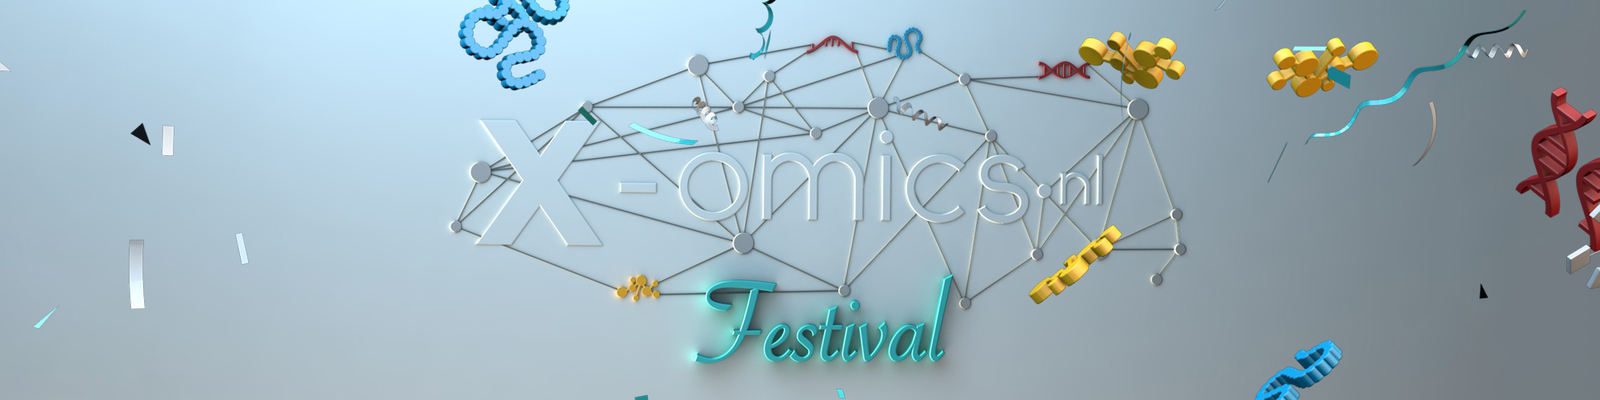 X-omics festival - "The future of multi-omics research is now!”